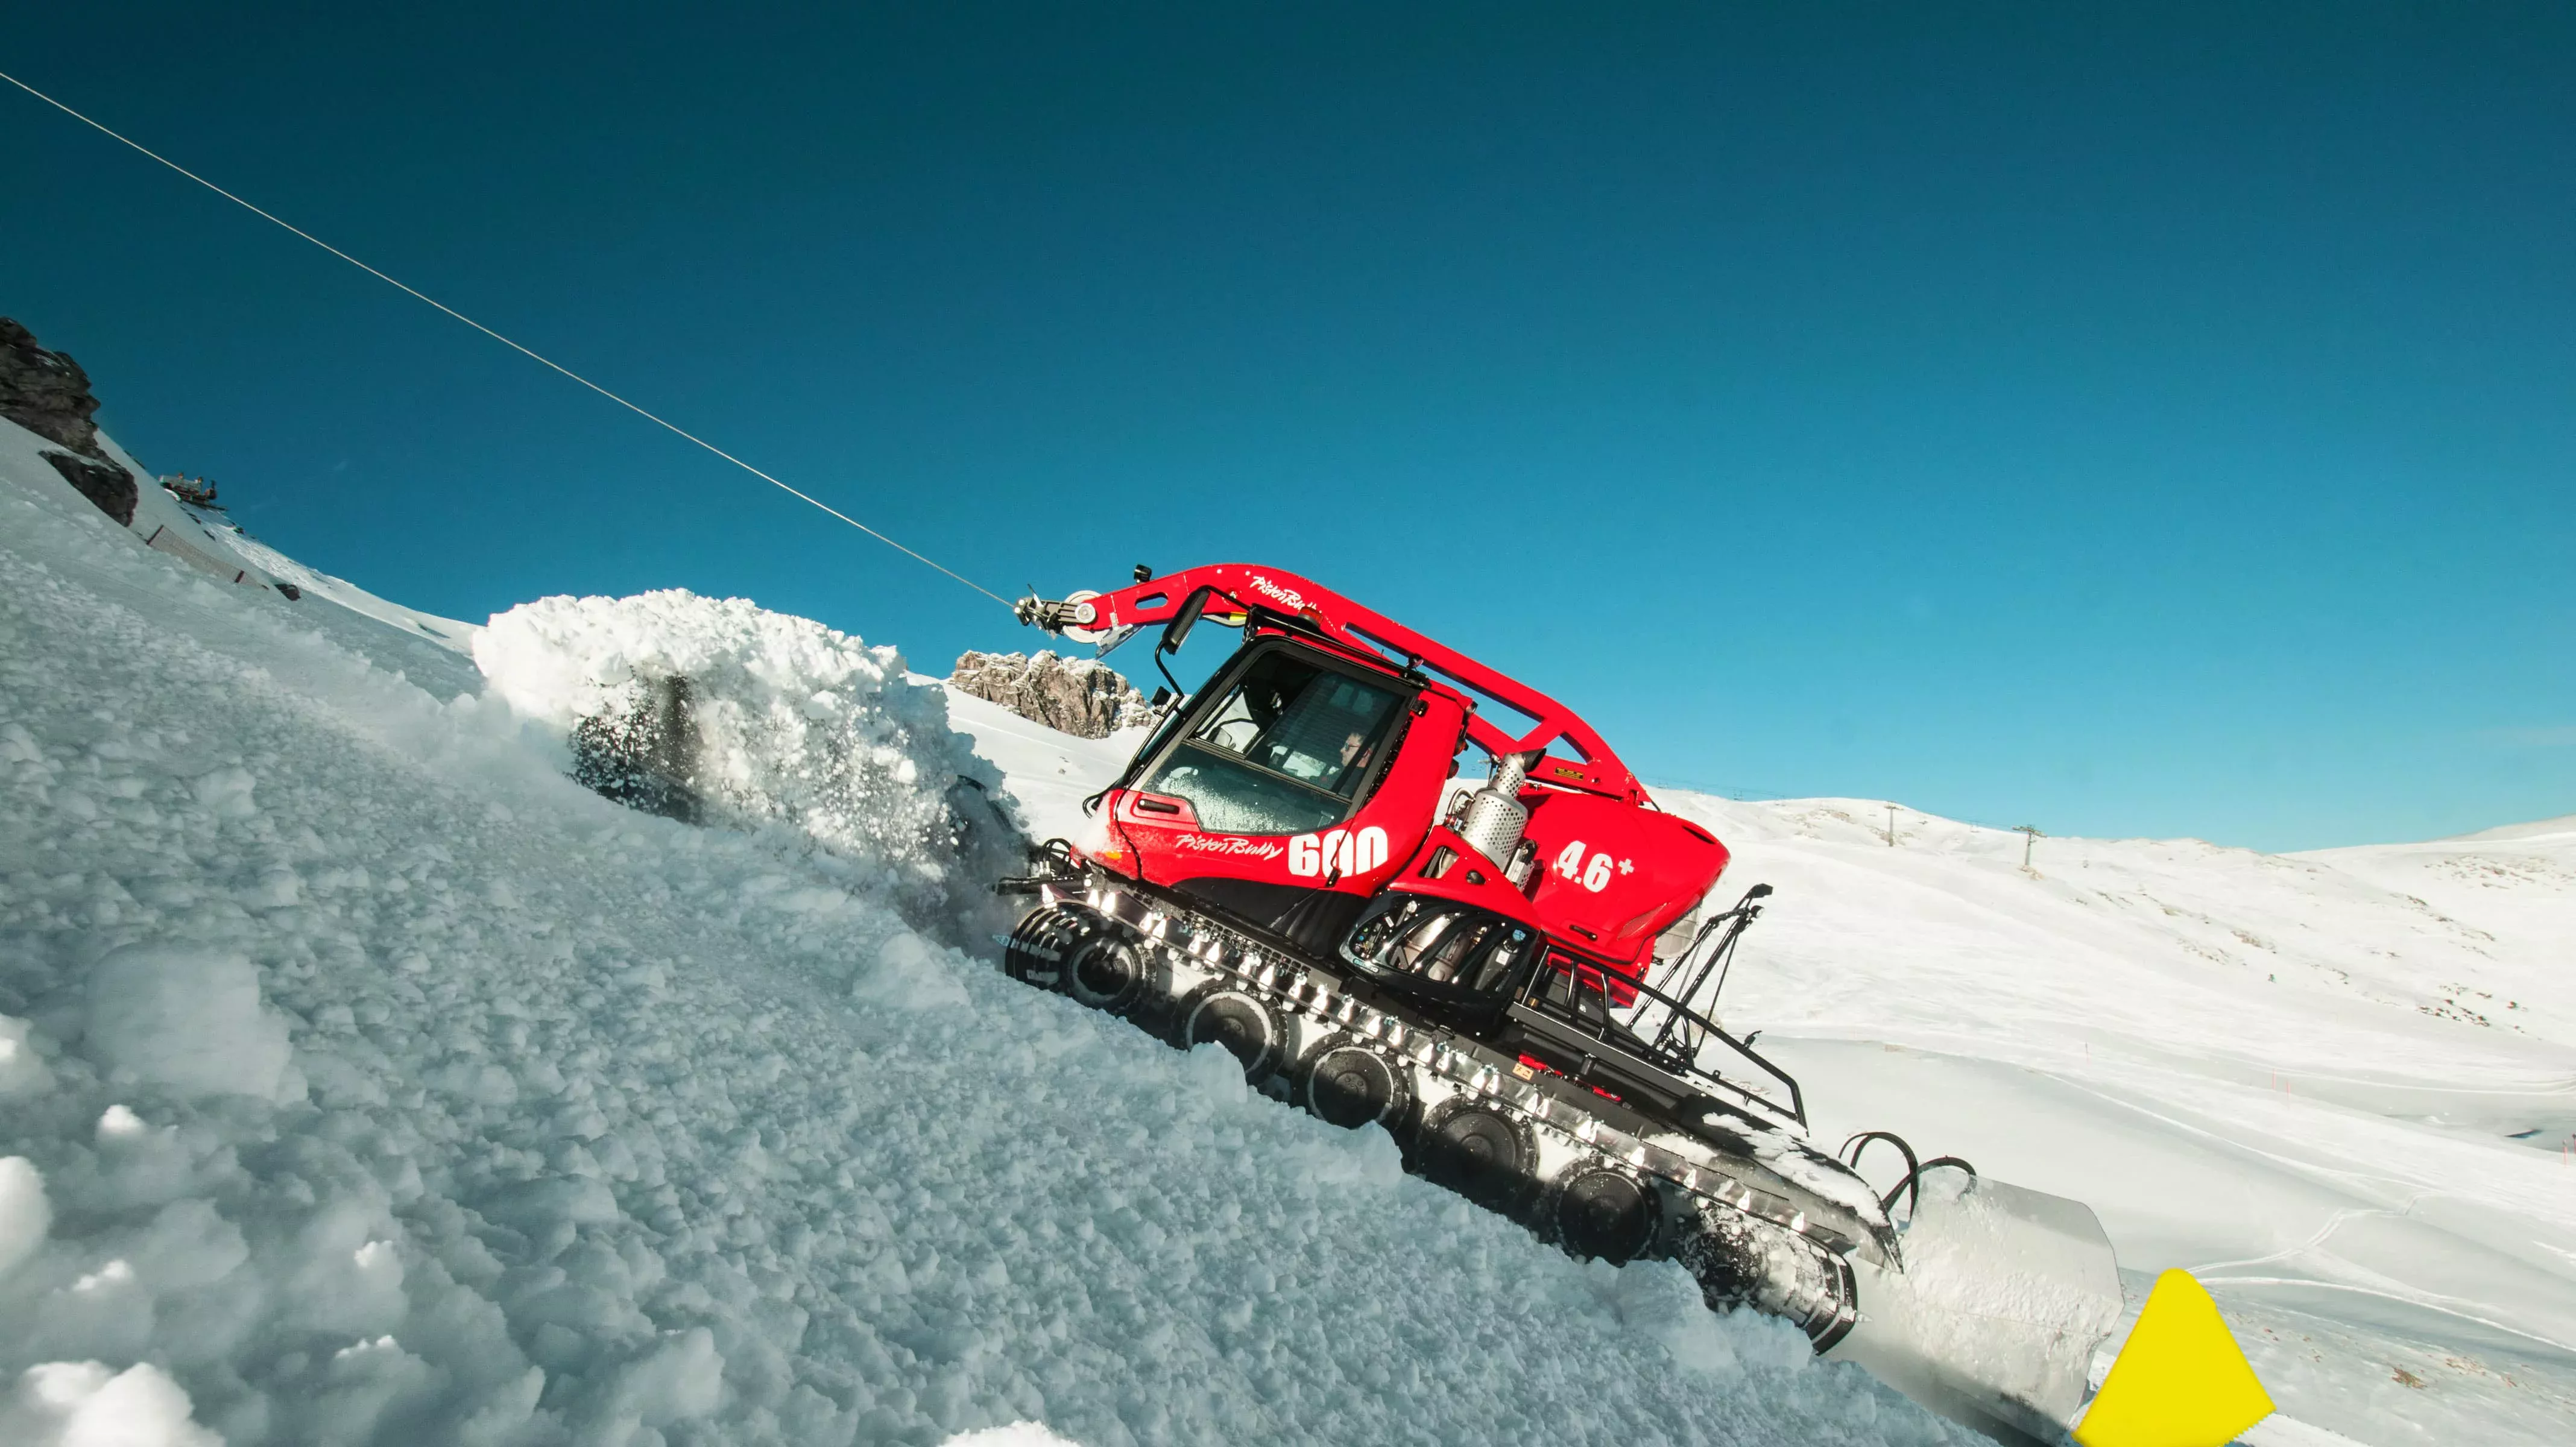 PistenBully 600 W pulls itself up the mountain.